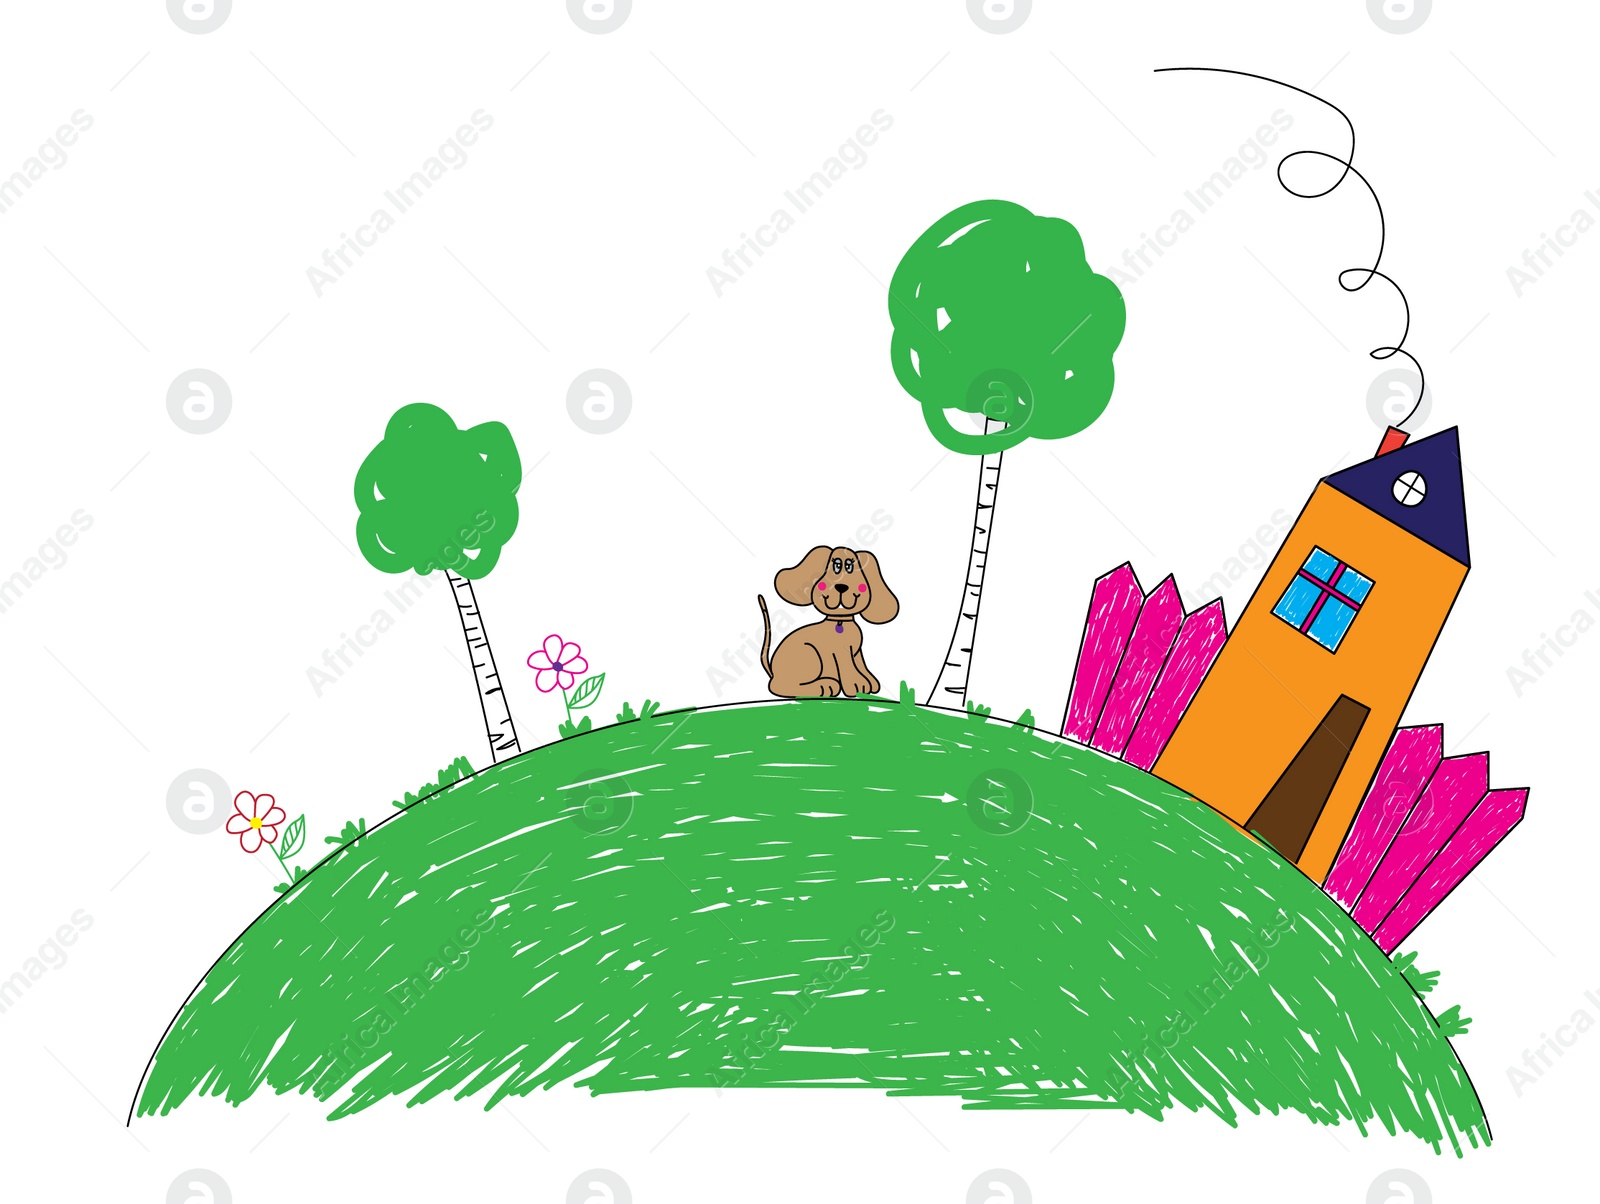 Illustration of Drawinghouse, trees and cute dog. Child art